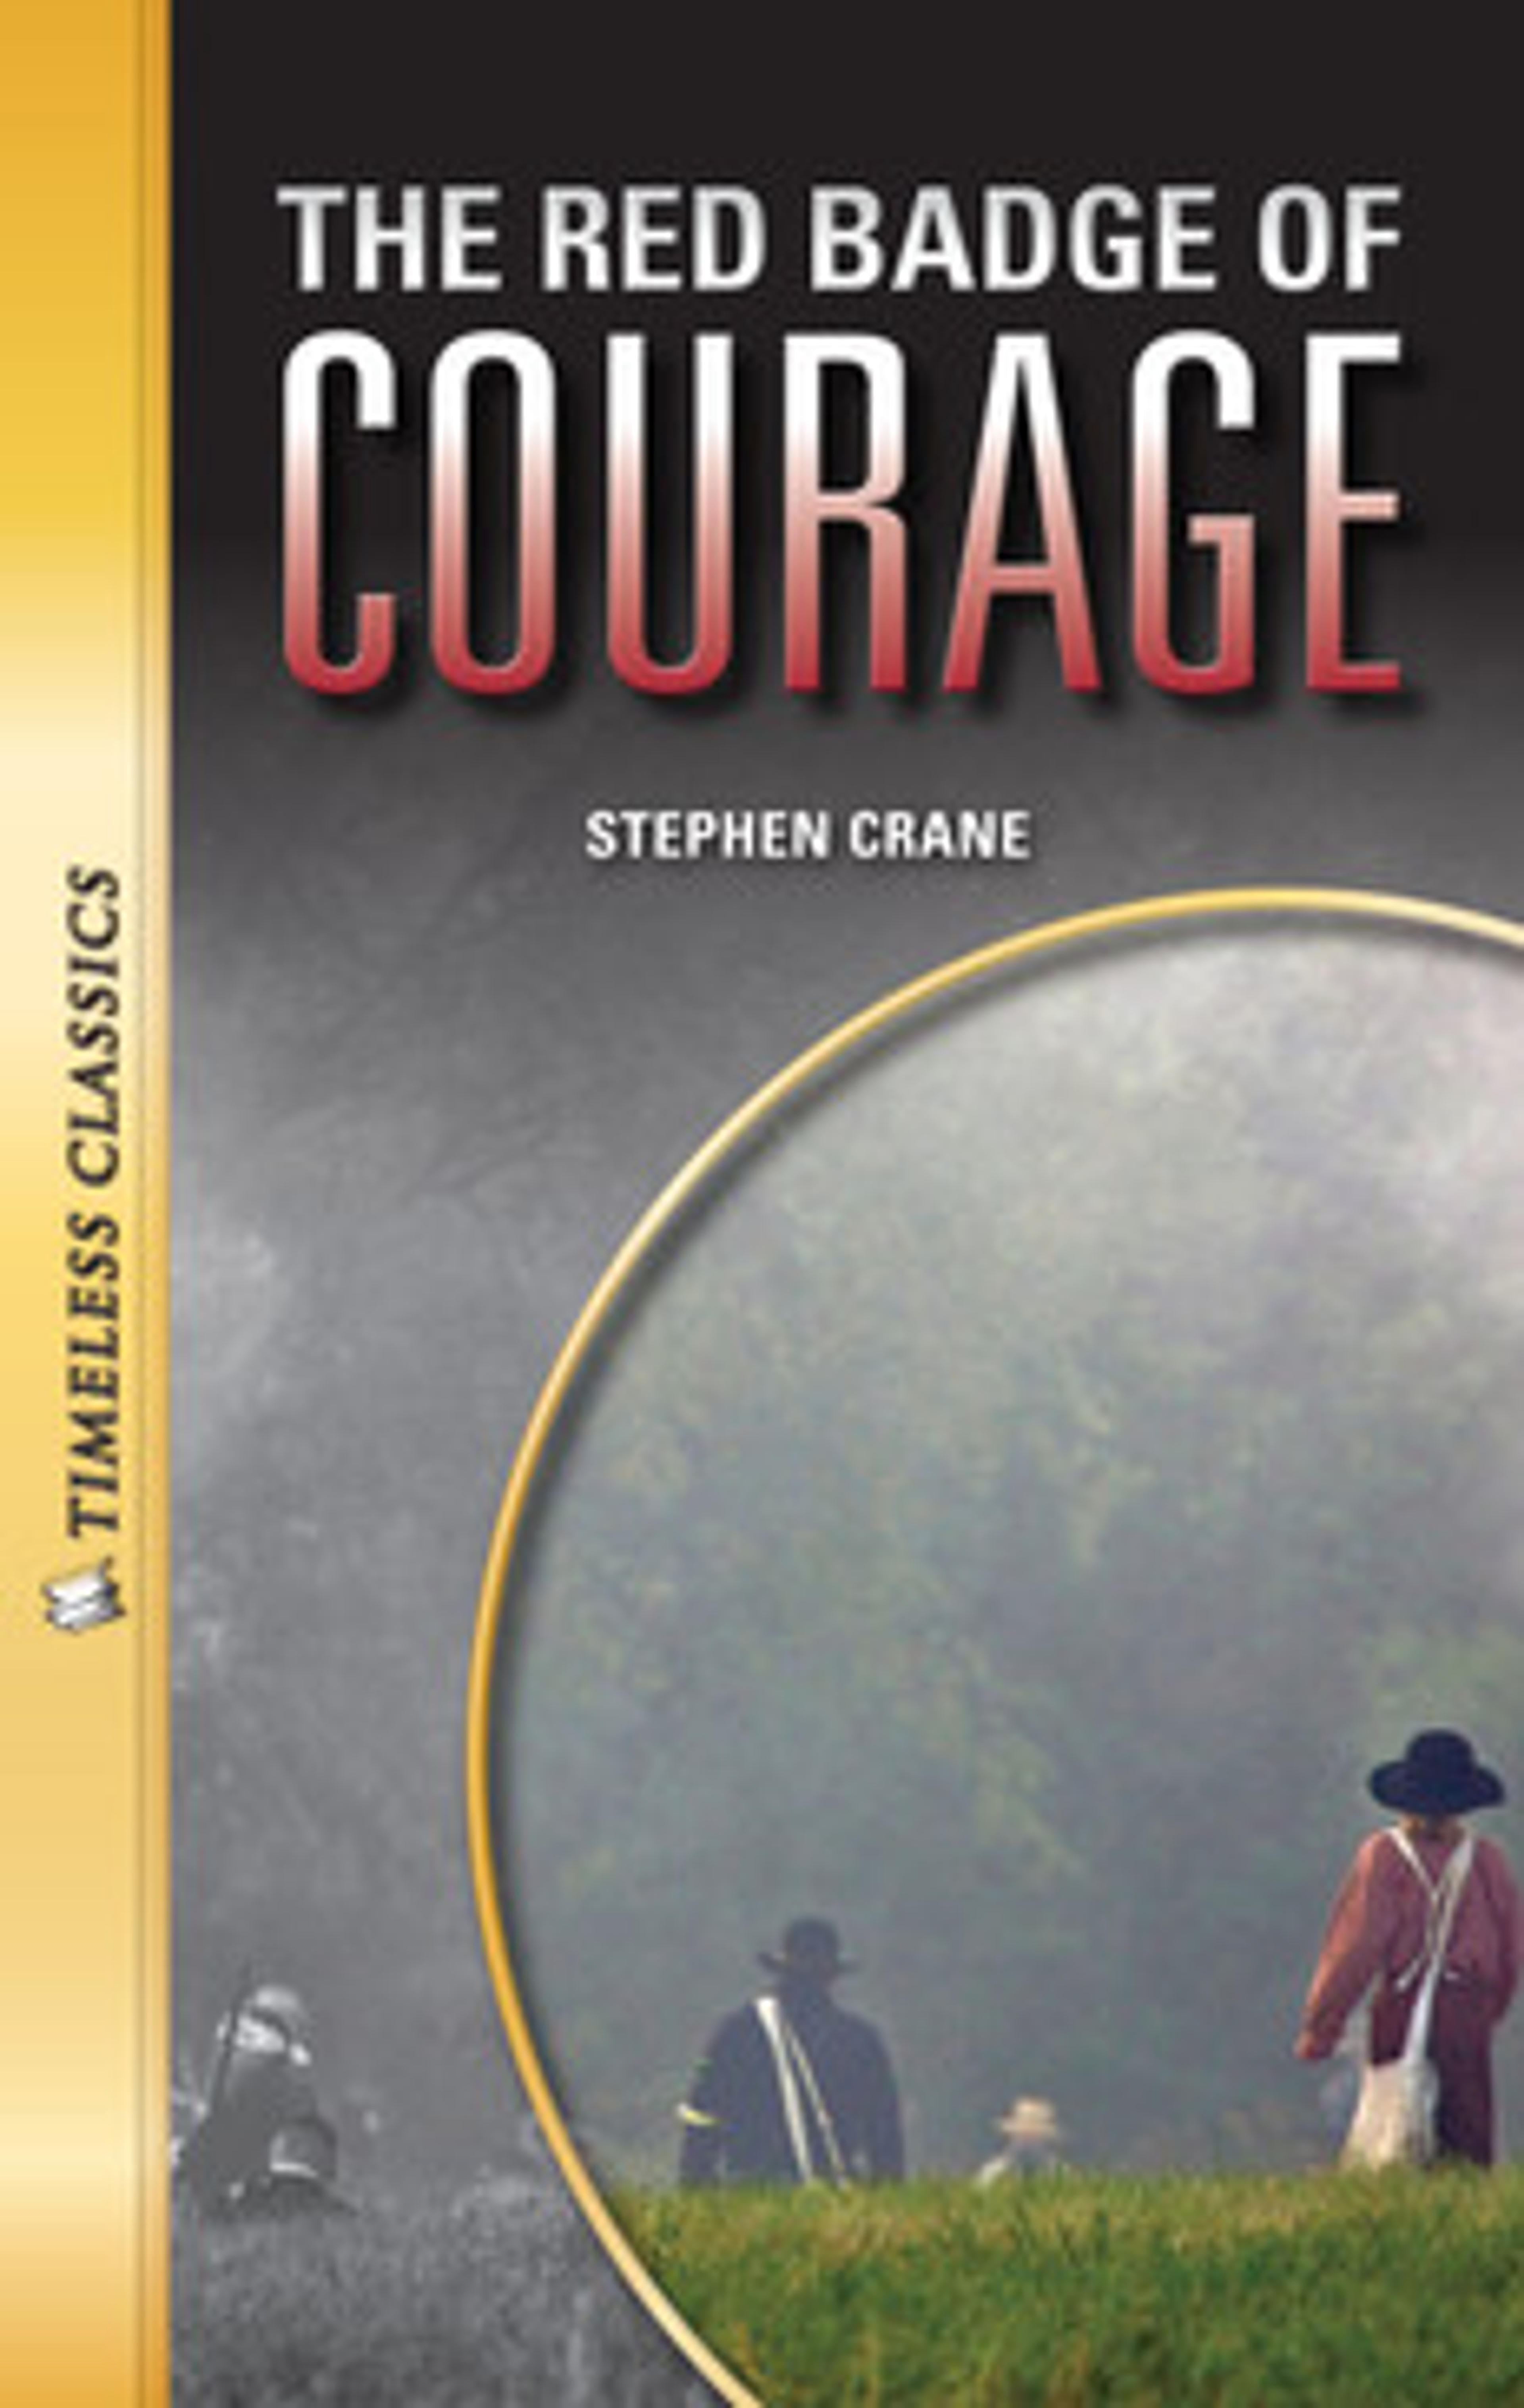 The Red Badge of Courage Novel